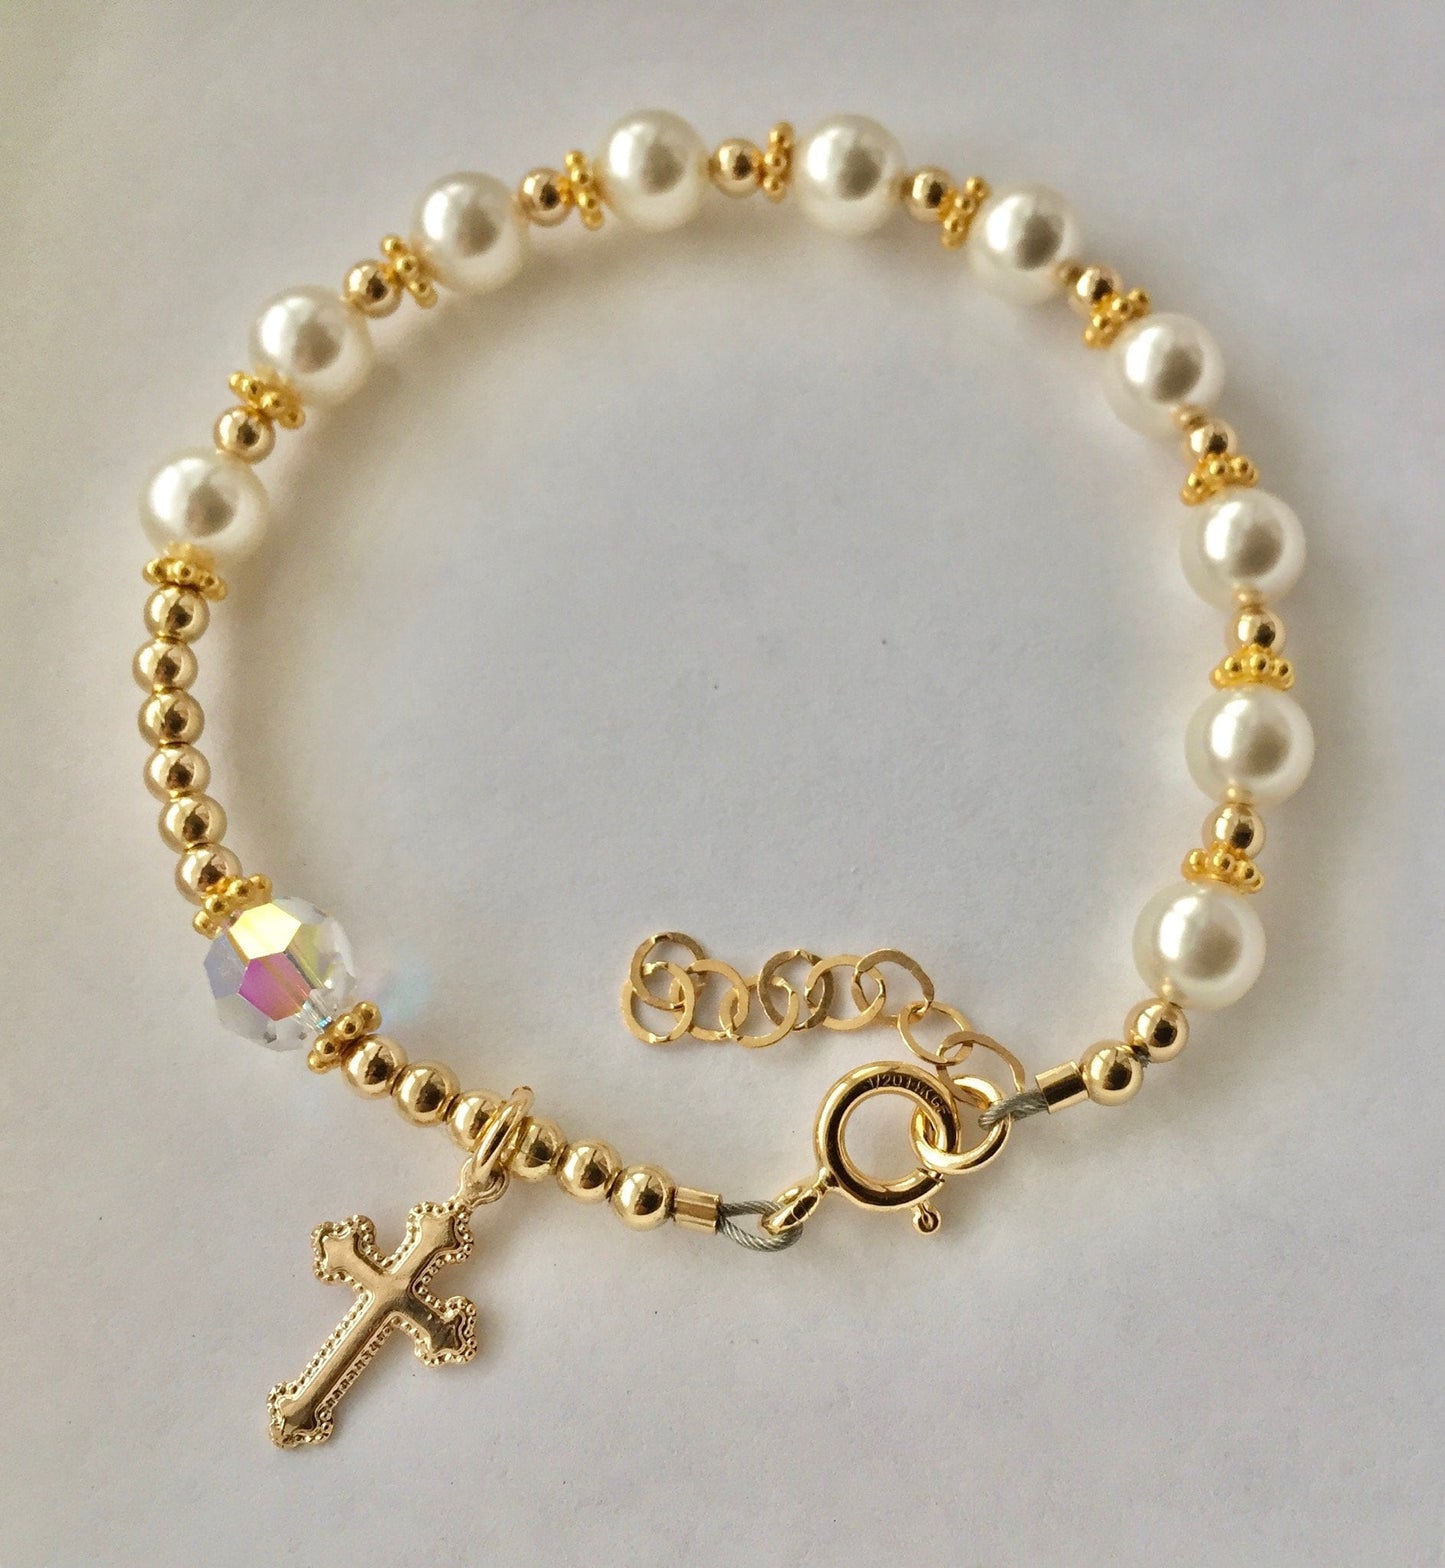 Rosary Pearl Bracelet,Gold Pearl Rosary Bracelet,Gold Cross Bracelet,First Communion Gold Bracelet,Baptism Rosary Pearl Bracelet Chaplet